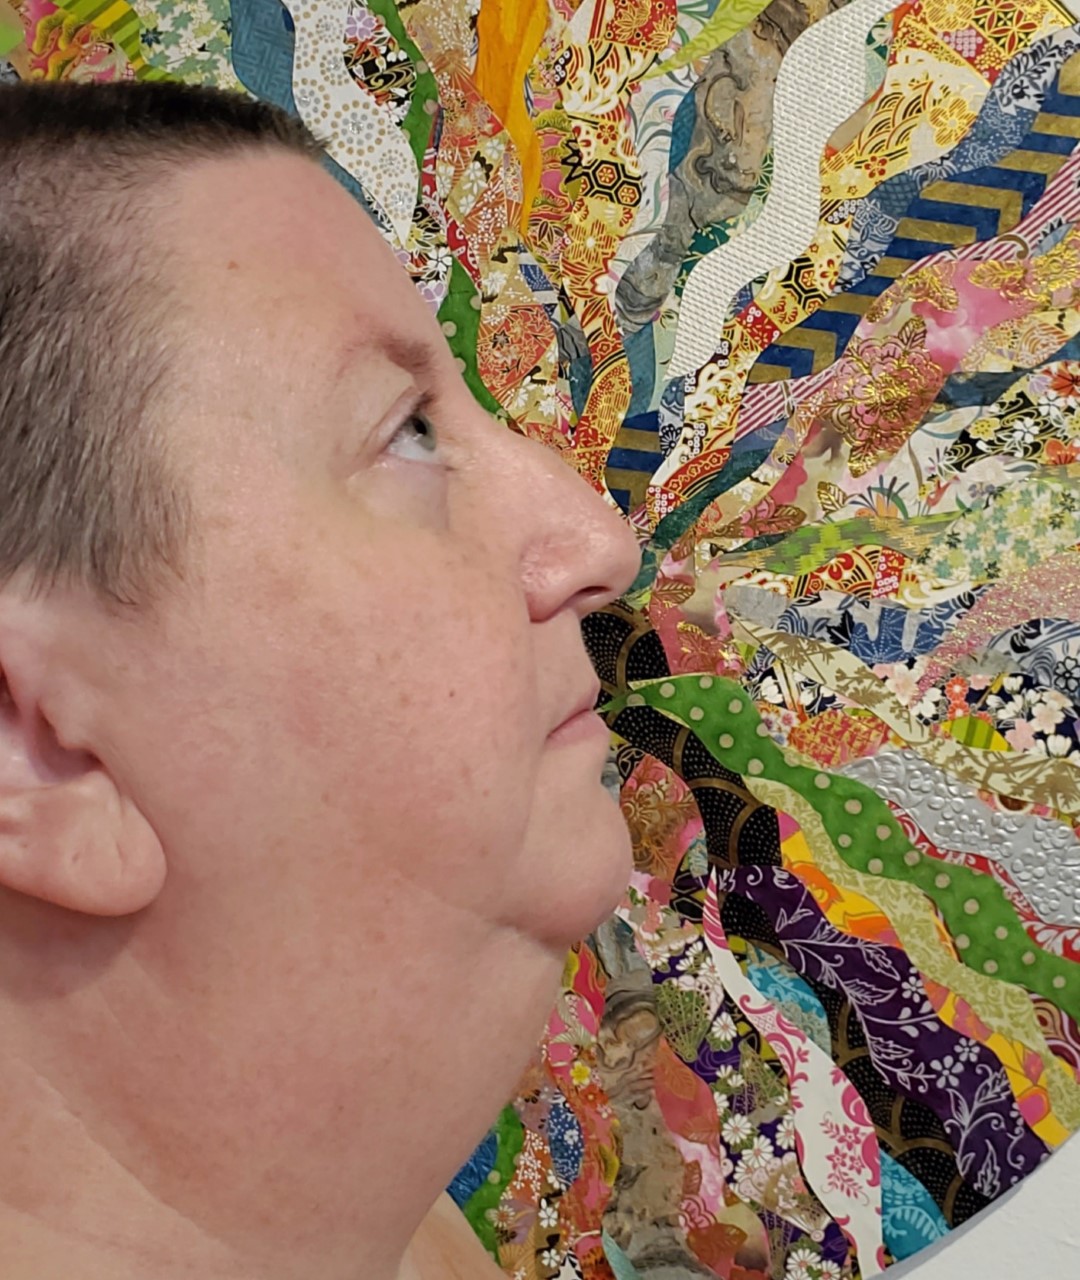 Kristine Schomaker in front of a collage of patterns and textures